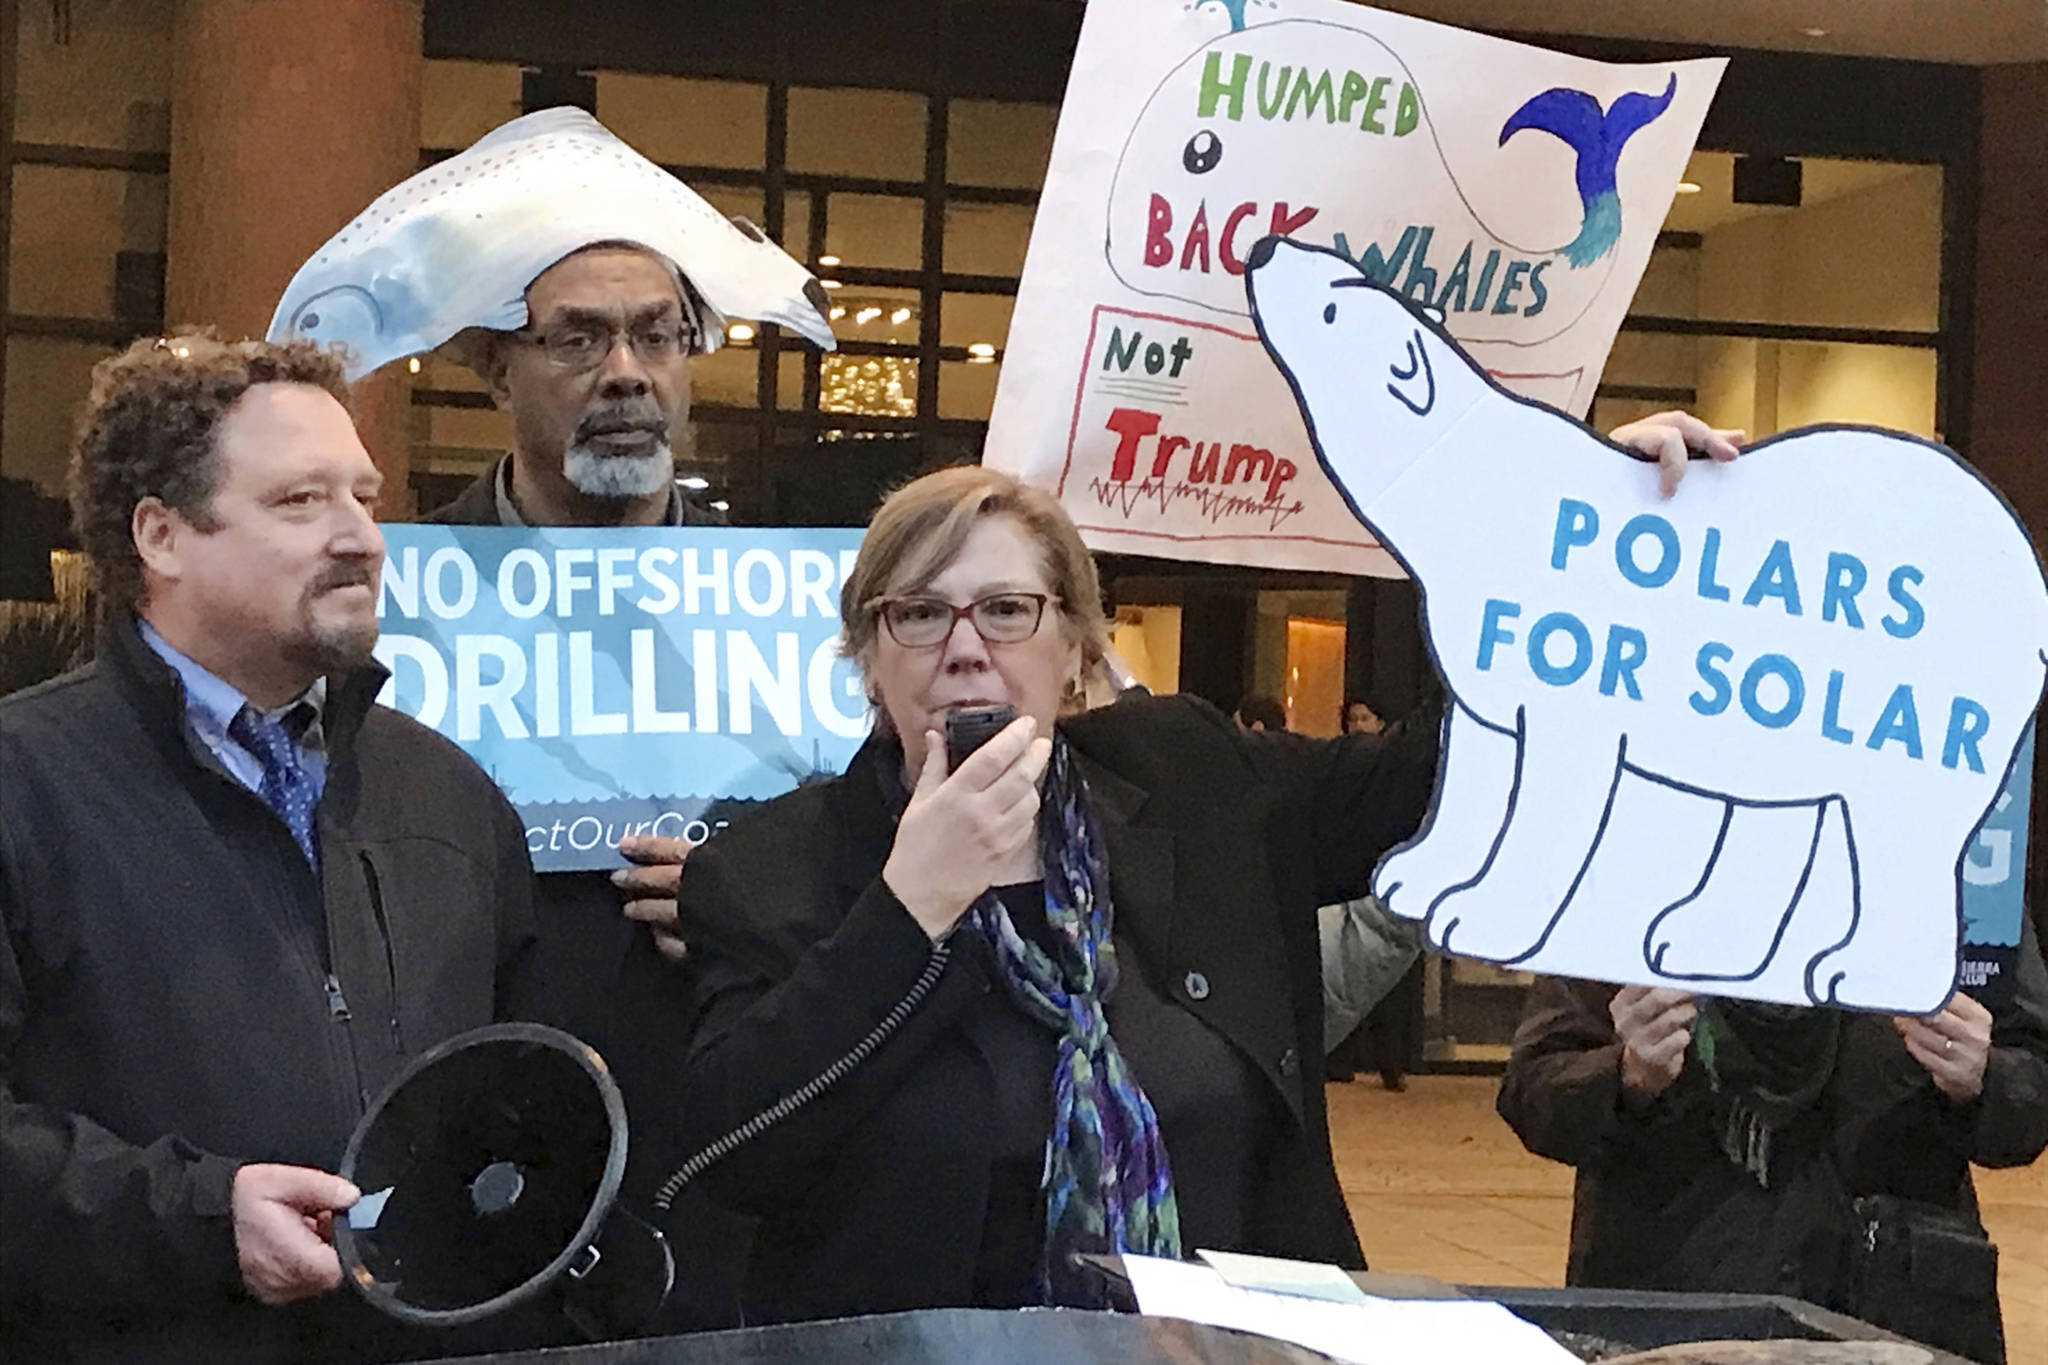 In this Feb. 15, 2018 photo, Judith Enck, center, former regional administrator for the Environmental Protection Agency addresses those gathered at a protest against President Trump’s plan to expand offshore drilling for oil and gas in Albany, New York. A U.S. judge in Alaska says President Donald Trump exceeded his authority when he reversed a ban on offshore drilling in vast parts of the Arctic Ocean and dozens of canyons in the Atlantic Ocean. (David Klepper | Associated Press File)